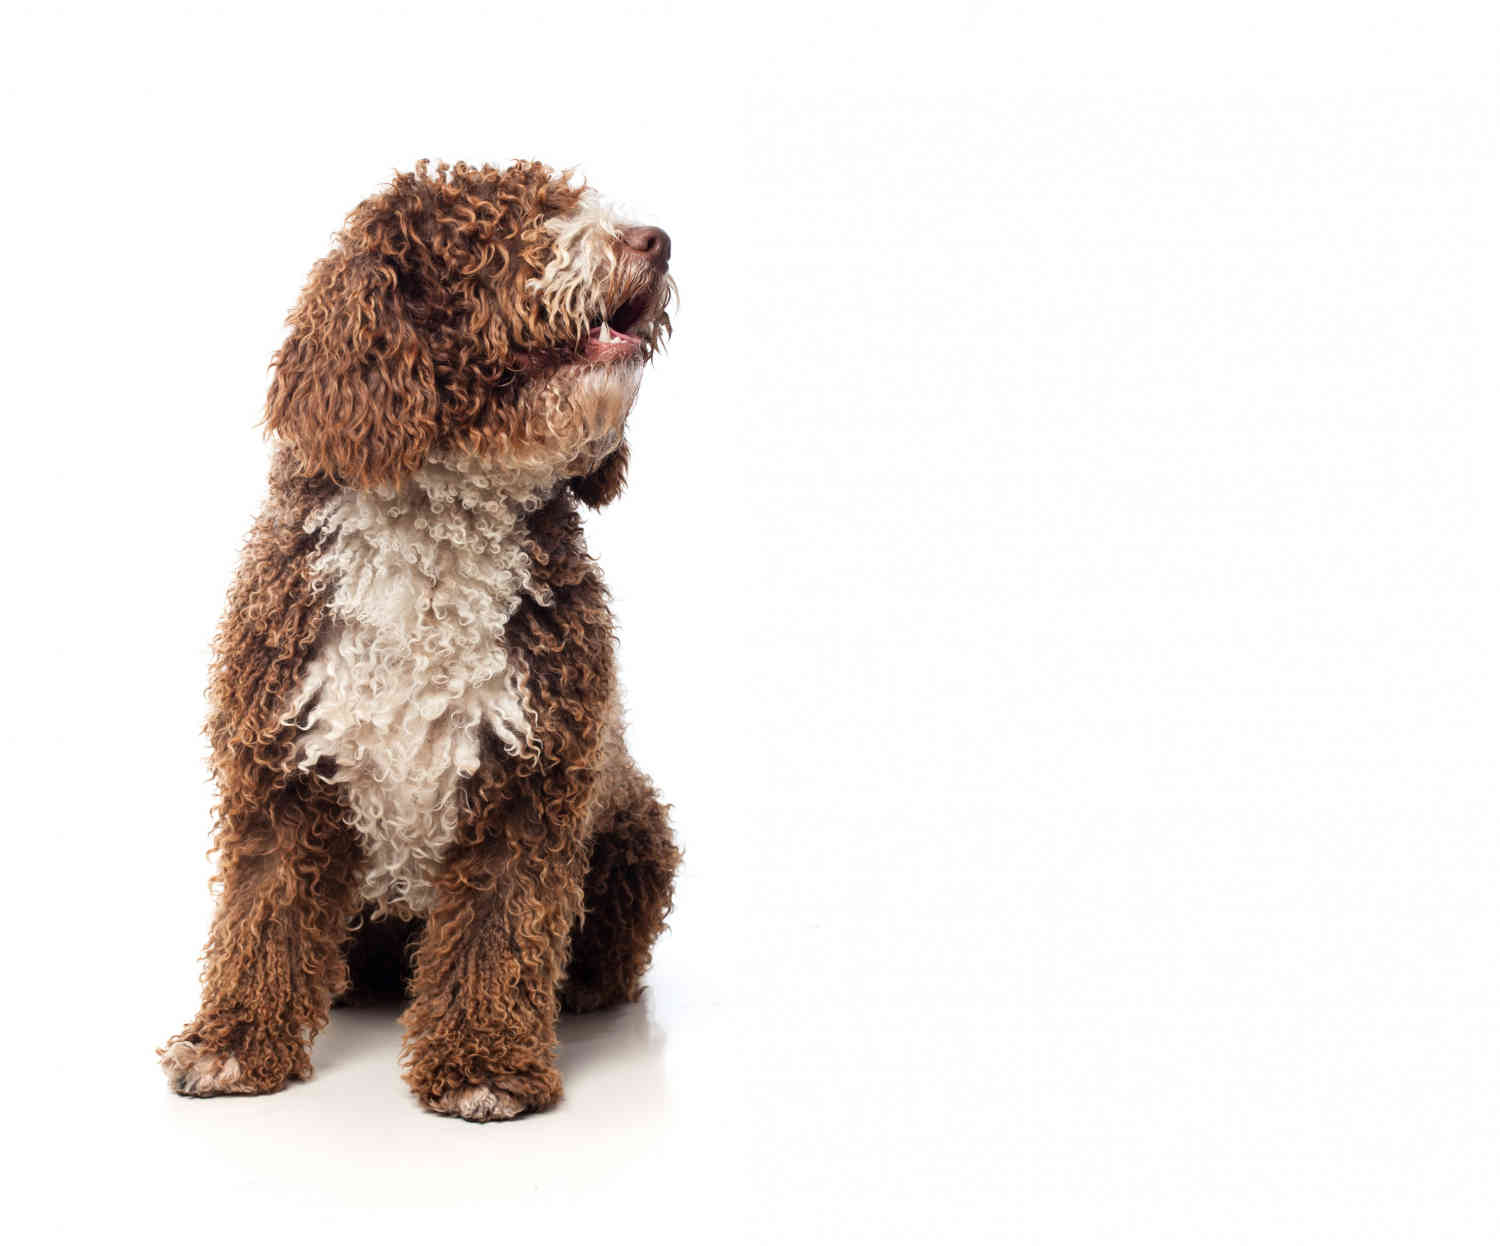 Introducing a Goldendoodle to a New Baby: Tips for a Safe and Happy Introduction